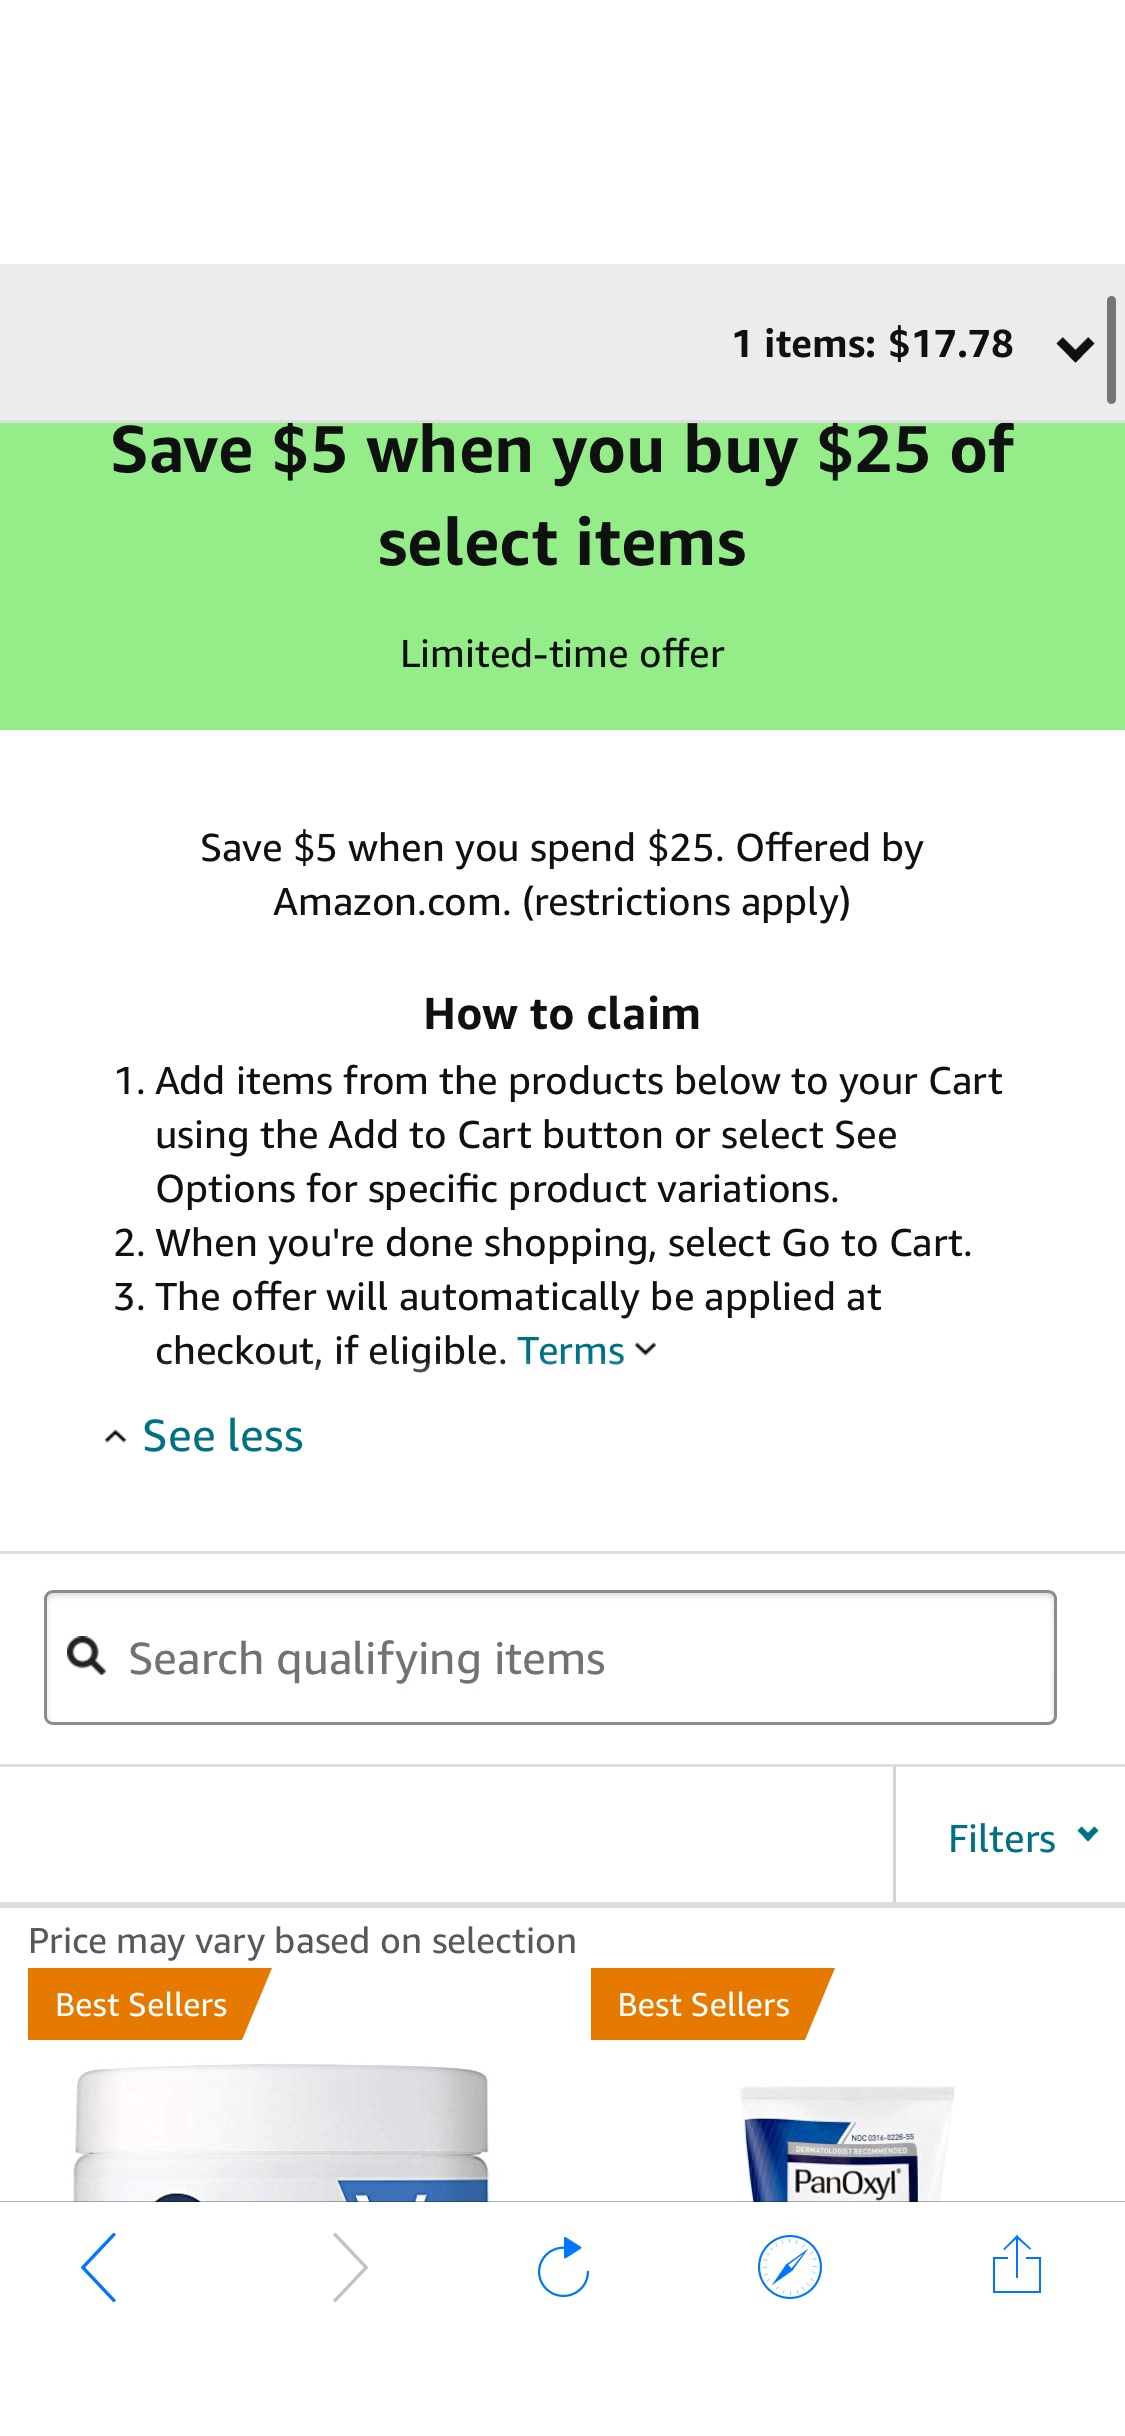 Amazon.com Save $5 when you buy $25 of select items promotion身体护肤